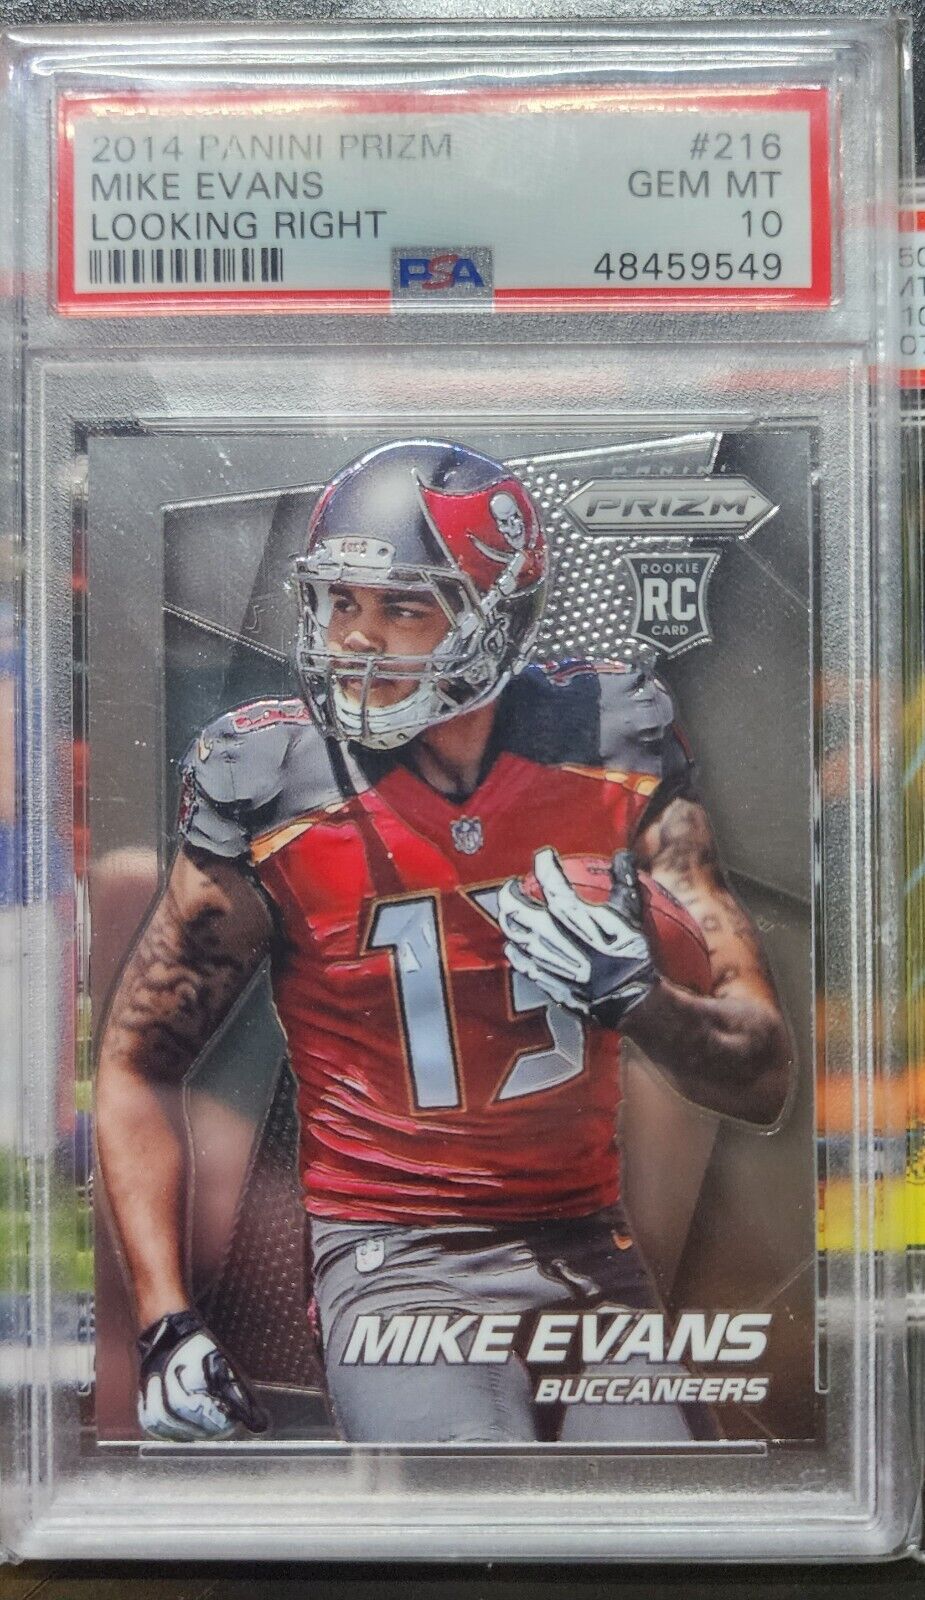 2014 Panini Prizm MIKE EVANS #216 Looking Right Rookie RC PSA 10 Gem Mint! 💎